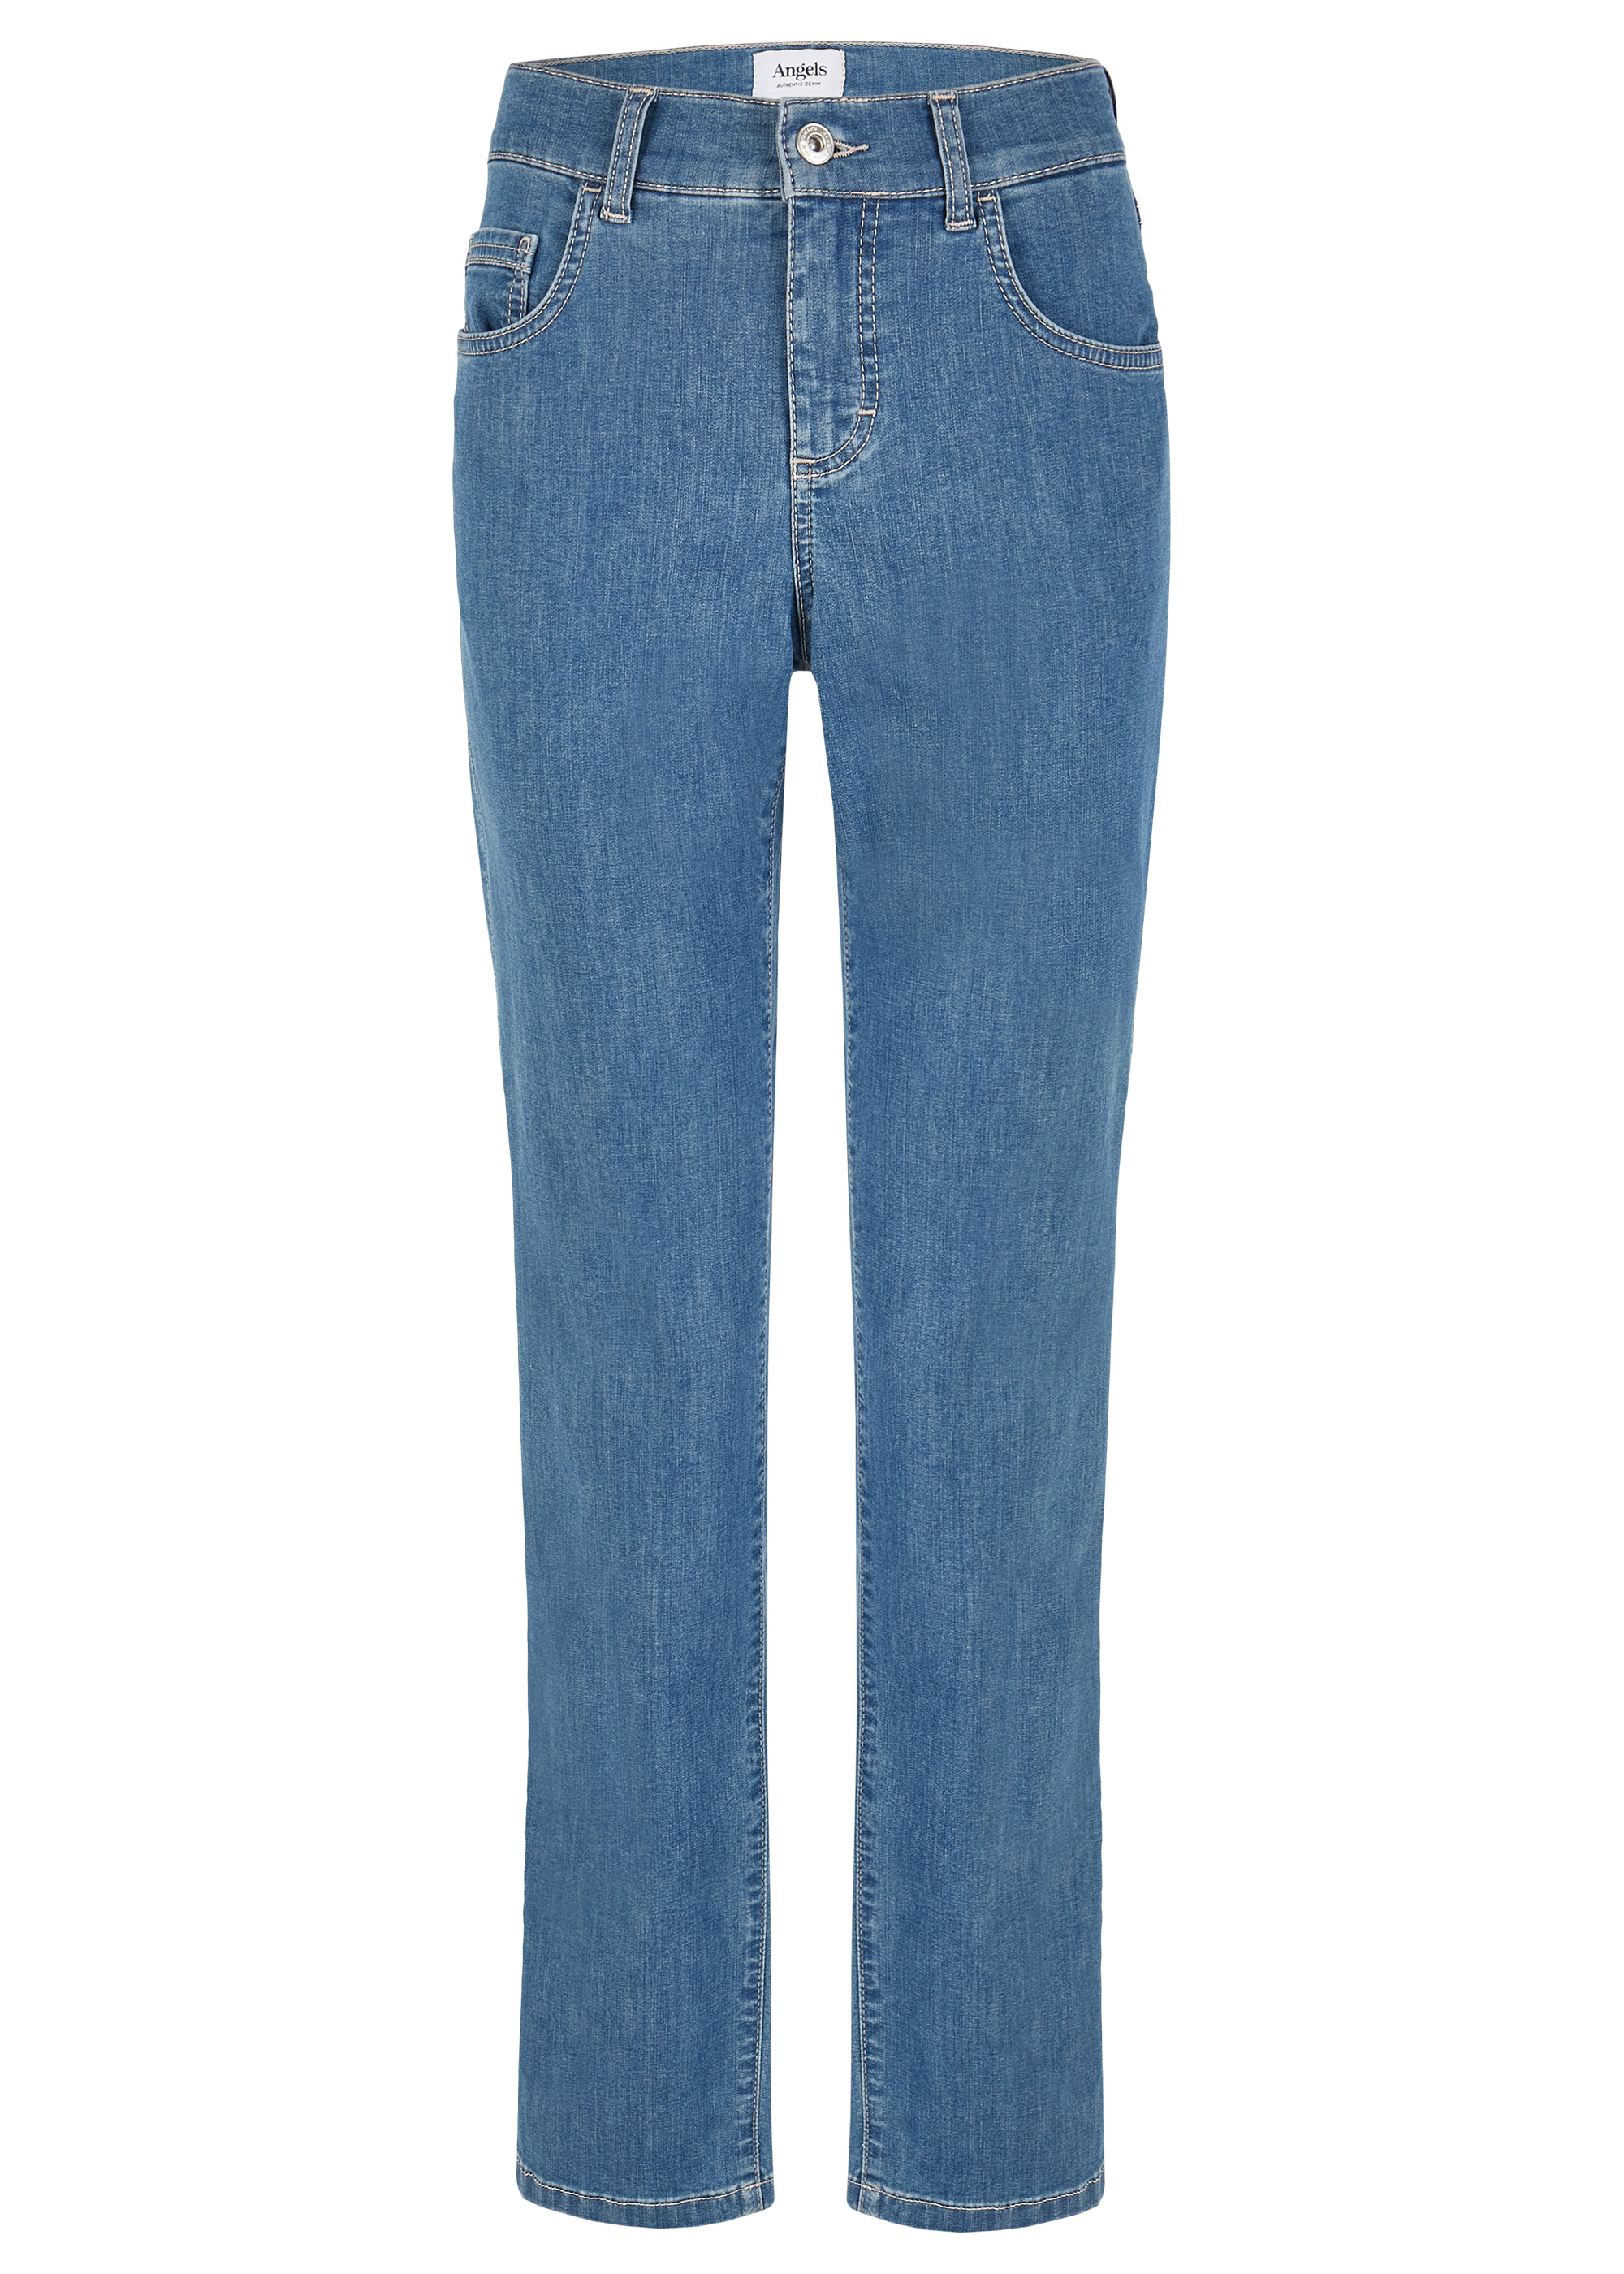 ANGELS JEANS DOLLY light blue 332 8000.34 | DENIM | Angels Dolly ...